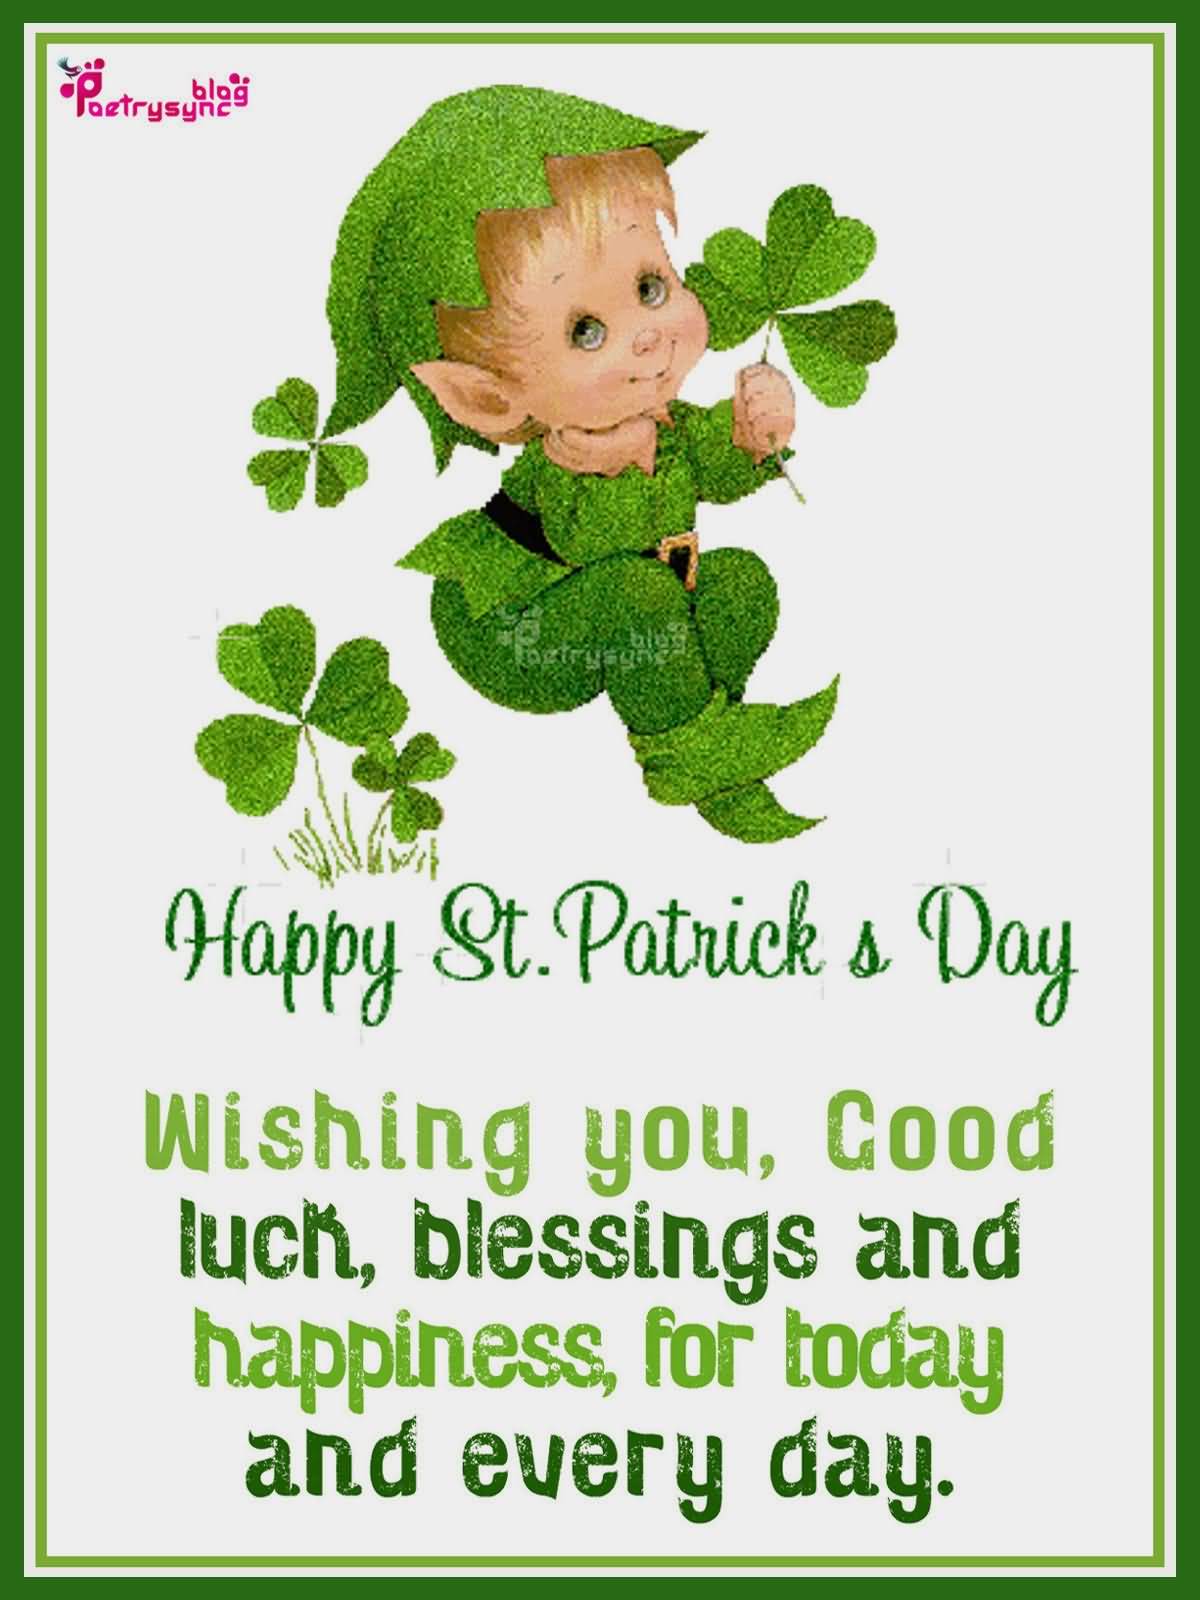 Happy Saint Patrick’s Day Wishing You Good Luck, Blessings And Happiness For Today And Every Day